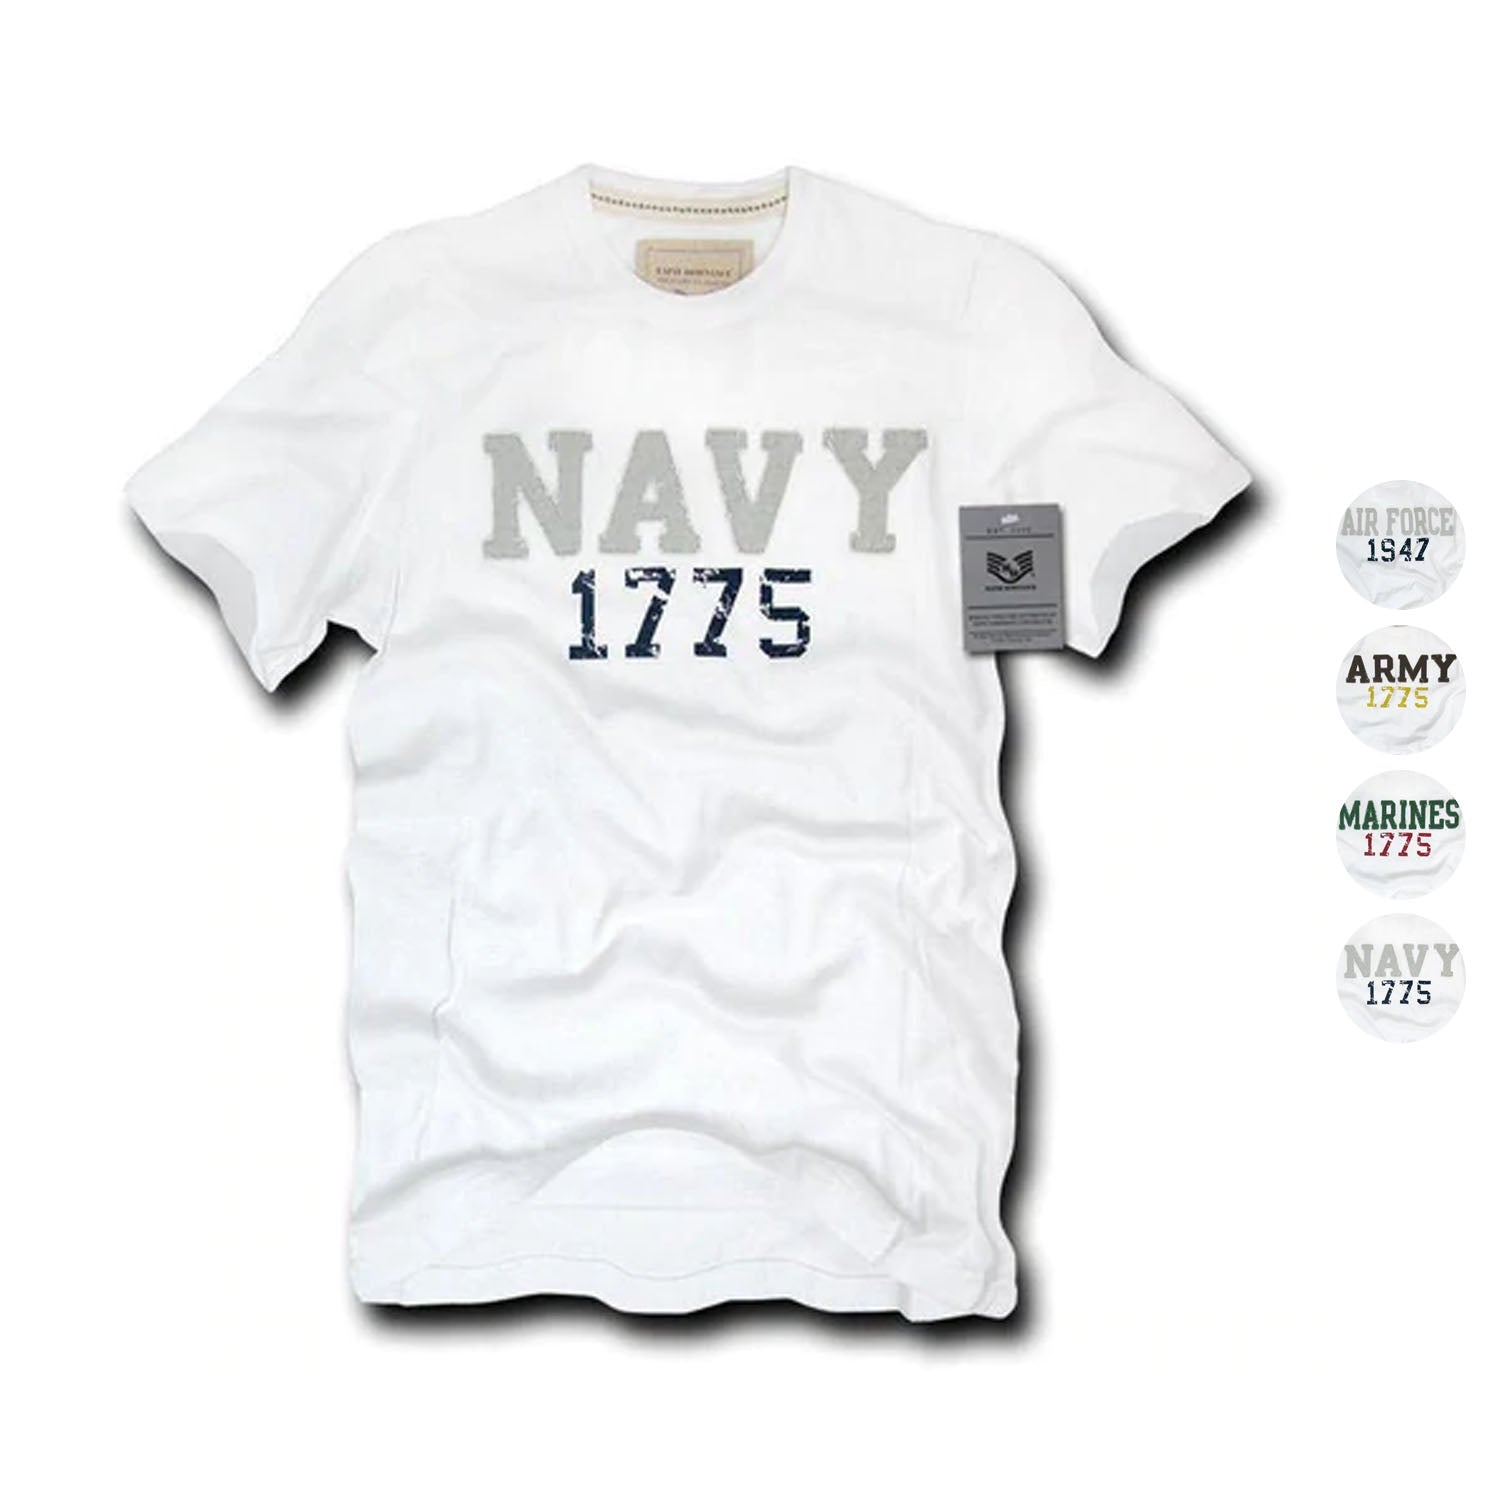 Rapid Dominance Army Air Force Navy Marines Applique Military Year T-S